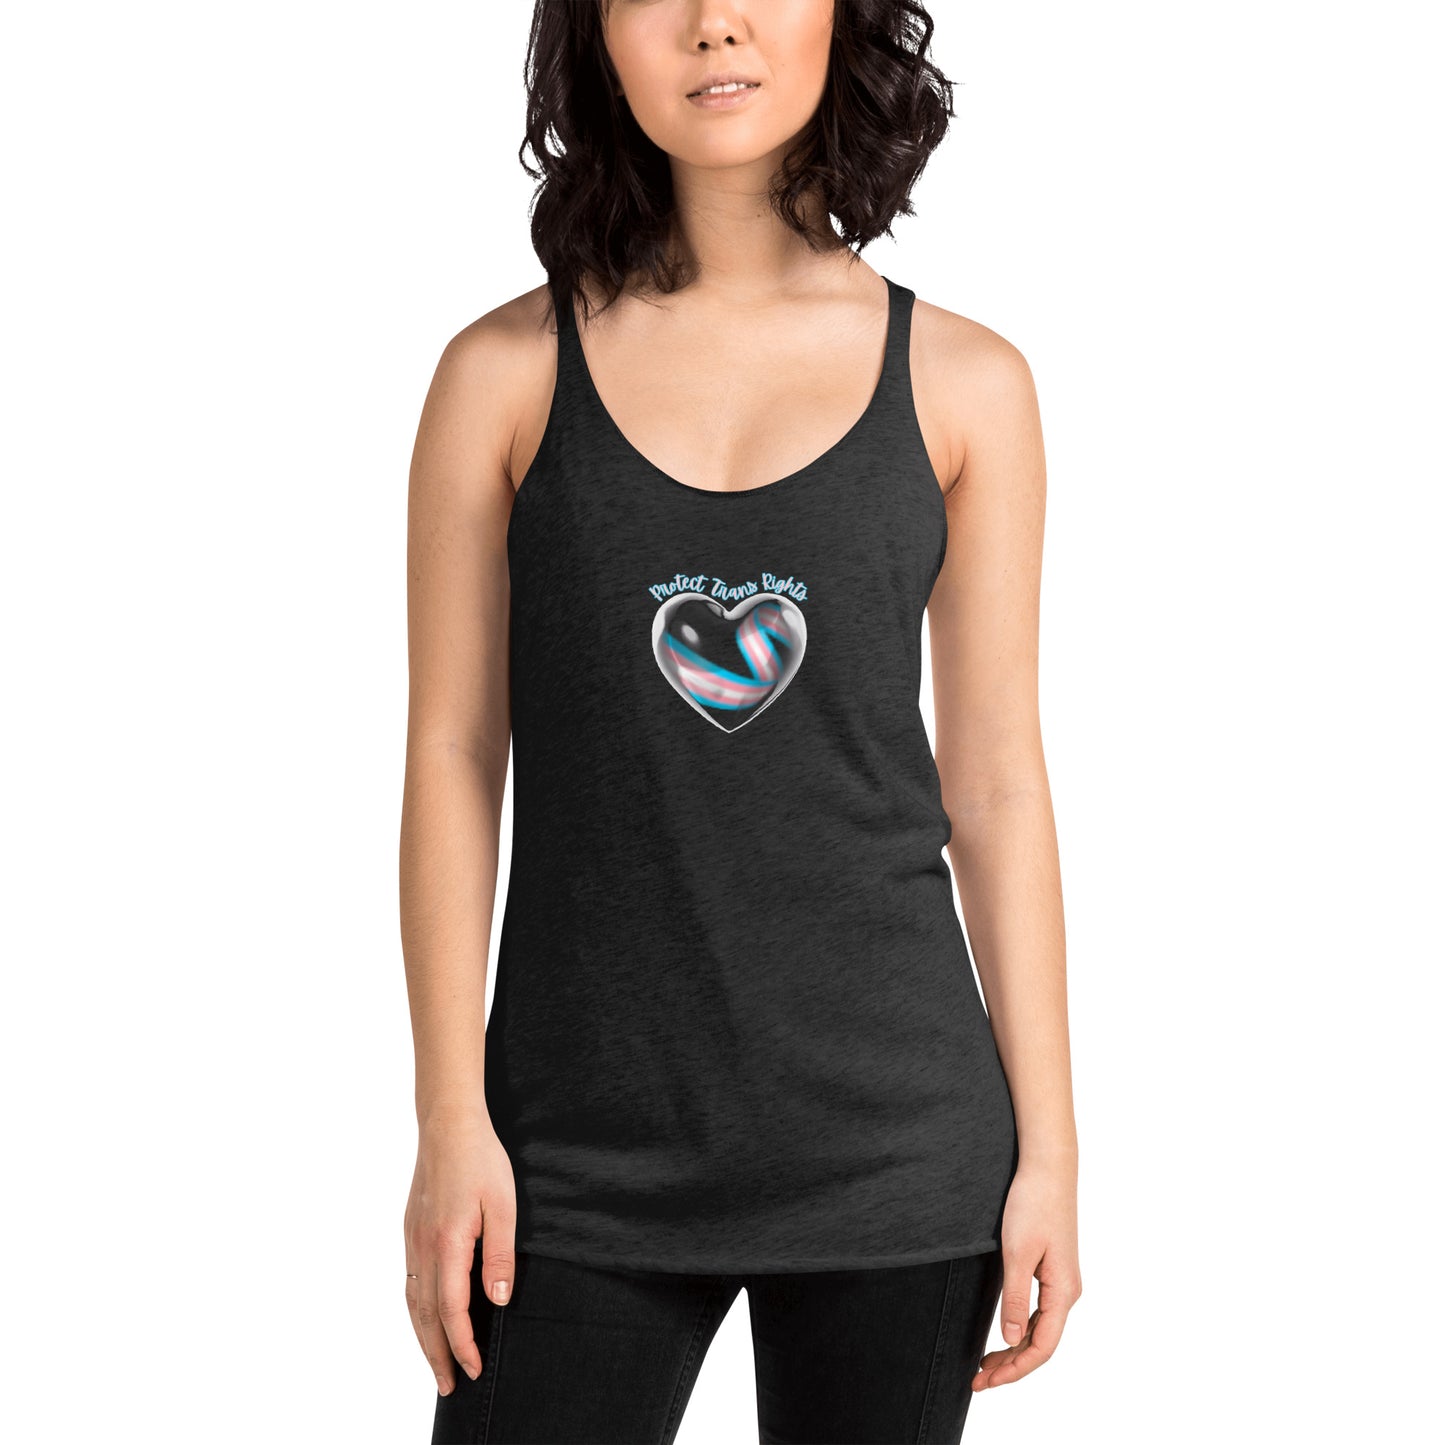 Protect Trans Rights - Women's Racerback Tank